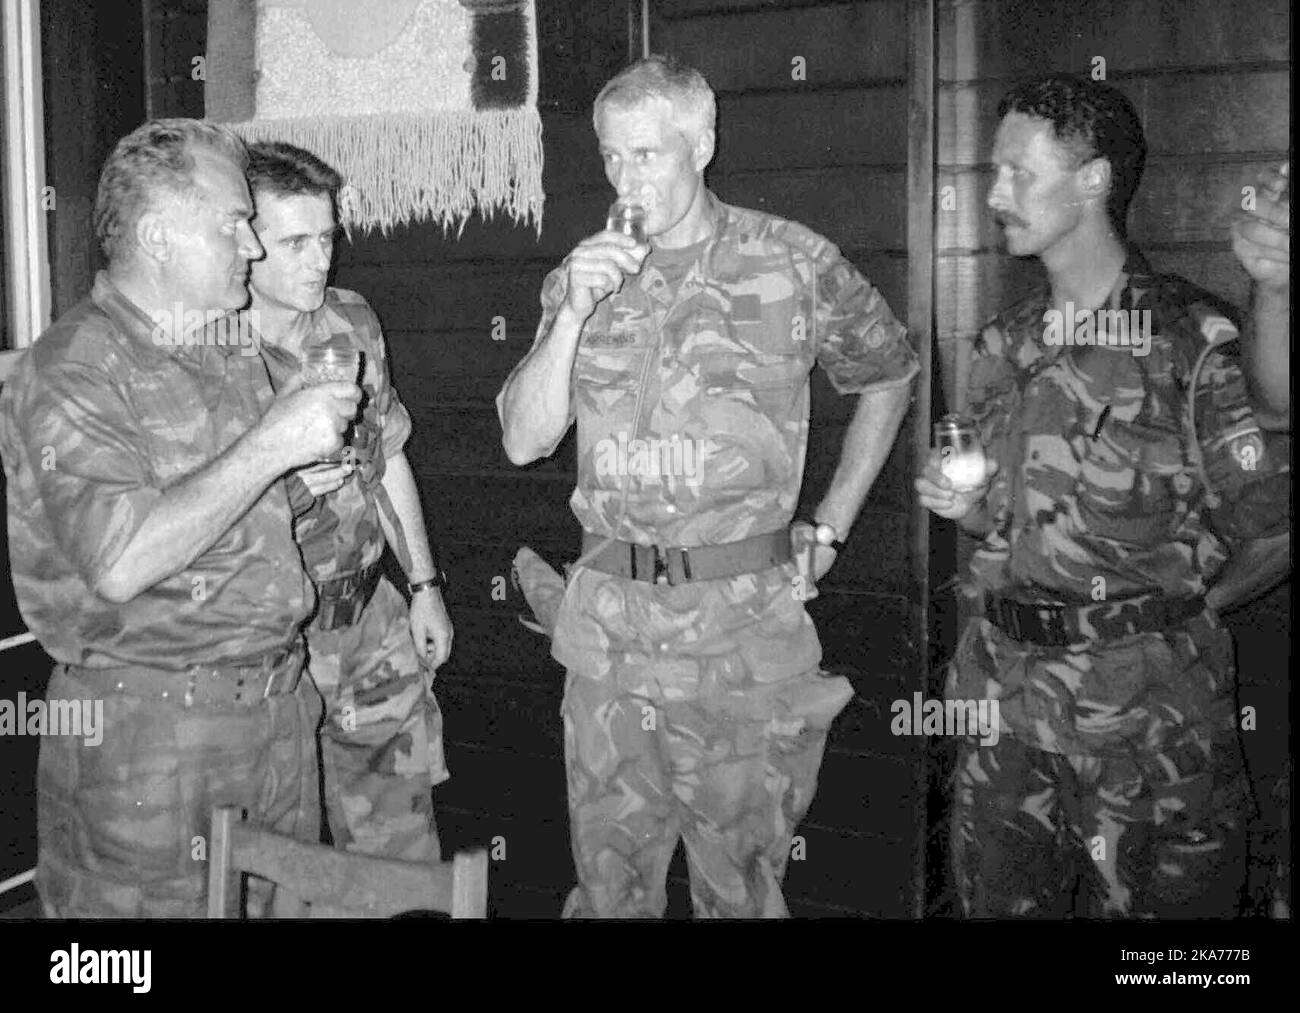 Bosnian Serb army commander General Ratko Mladic, left, drinks toast with Dutch U.N Commander Ton Karremans, second right, while others unidentified look on in vilage of Potocari, in this July 12 1995 file photo. Karremans gave a testimony to the Yugoslav War Crimes Tribunal in the hearings against Bosnian Serb leaders Radovan Karadzic and Ratko Mladic, Wednesday July 3 1996 Stock Photo